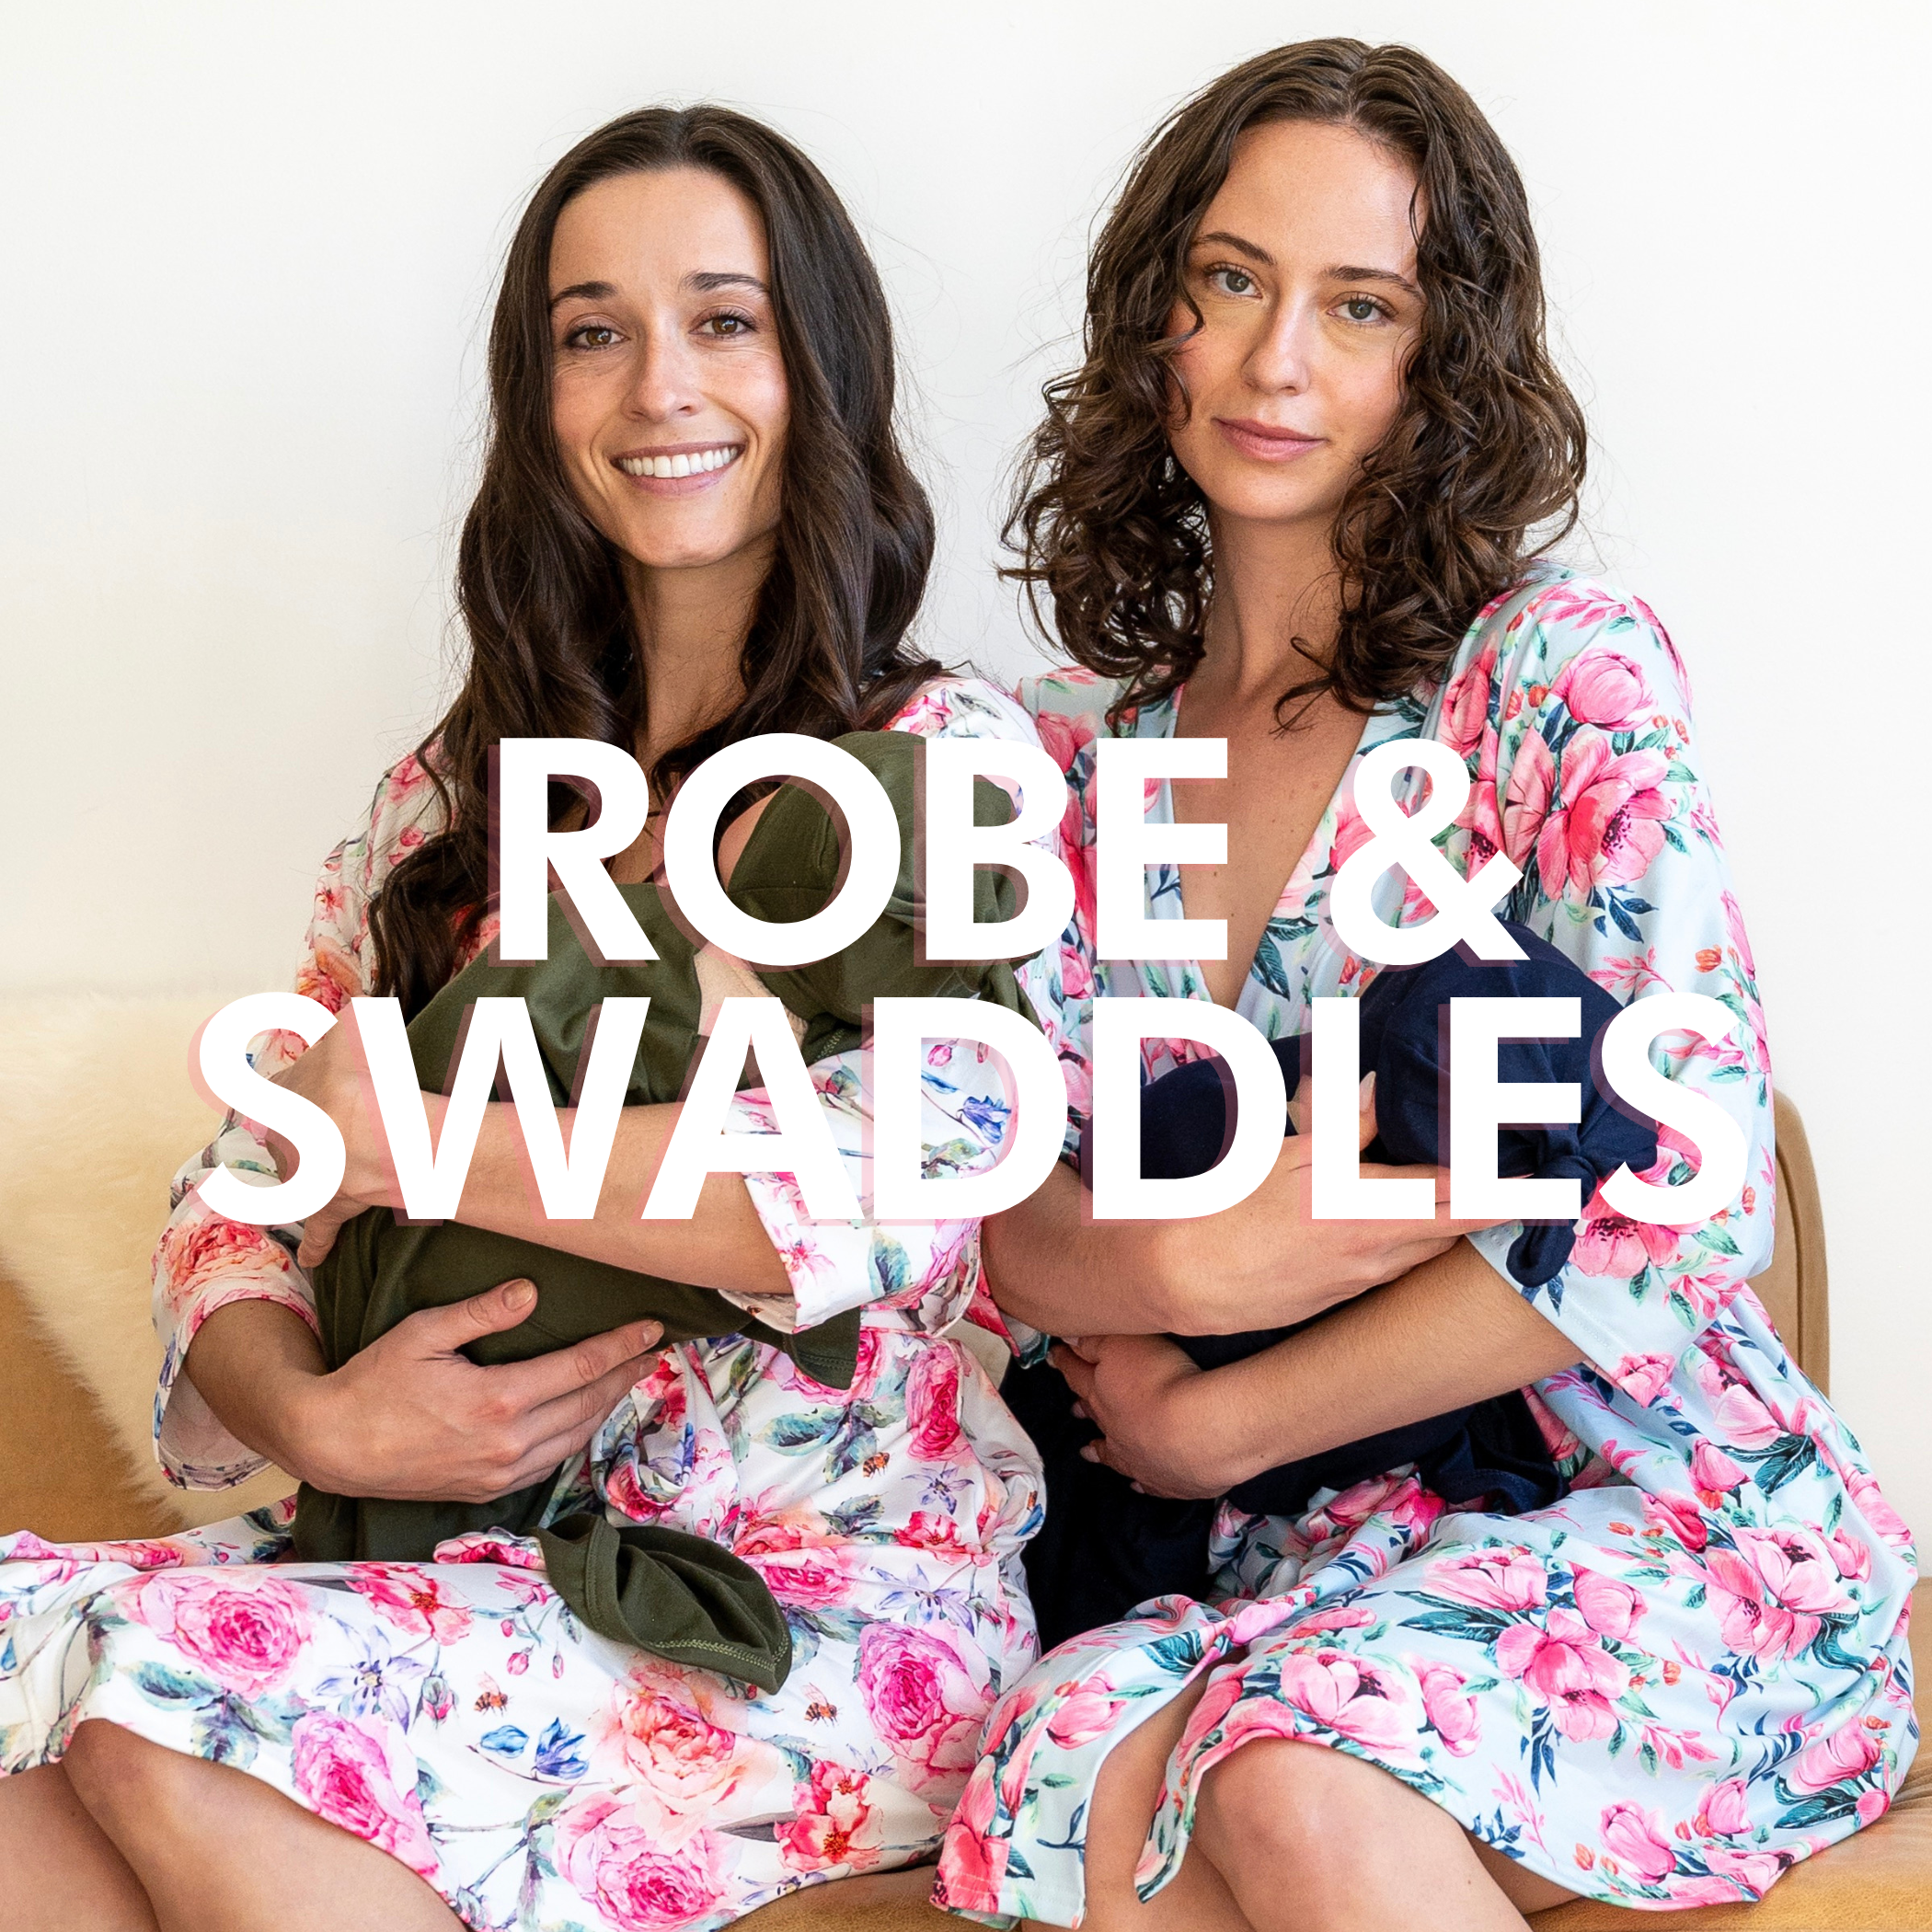 Maddison Maternity Robe – Double the Sprinkles